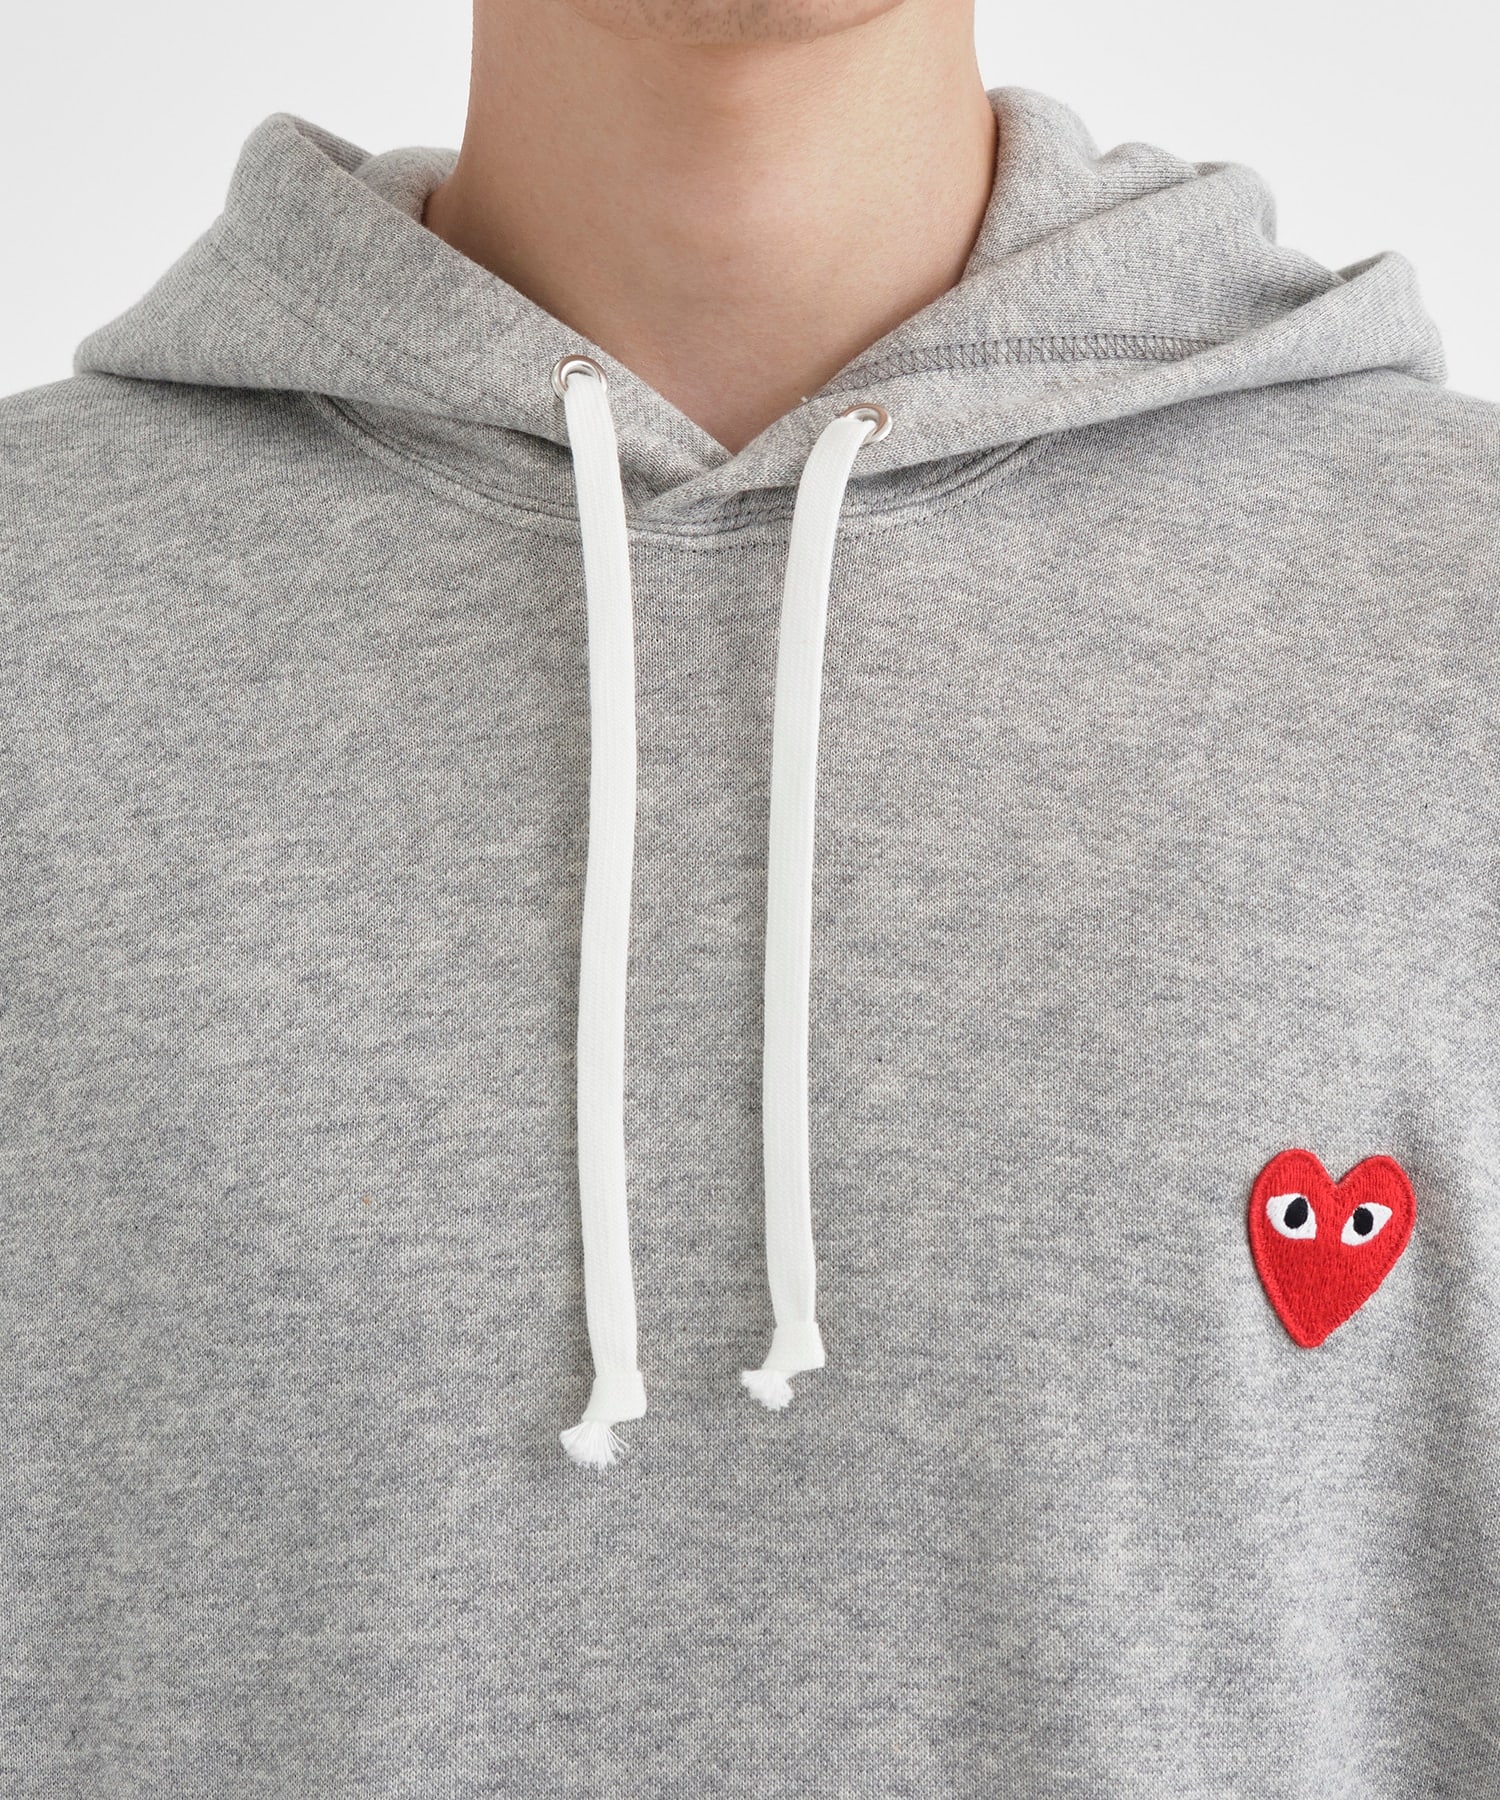 AZ-T170-051 PLAY HOODED SWEATSHIRT RED HEART PLAY COMME des GARCONS